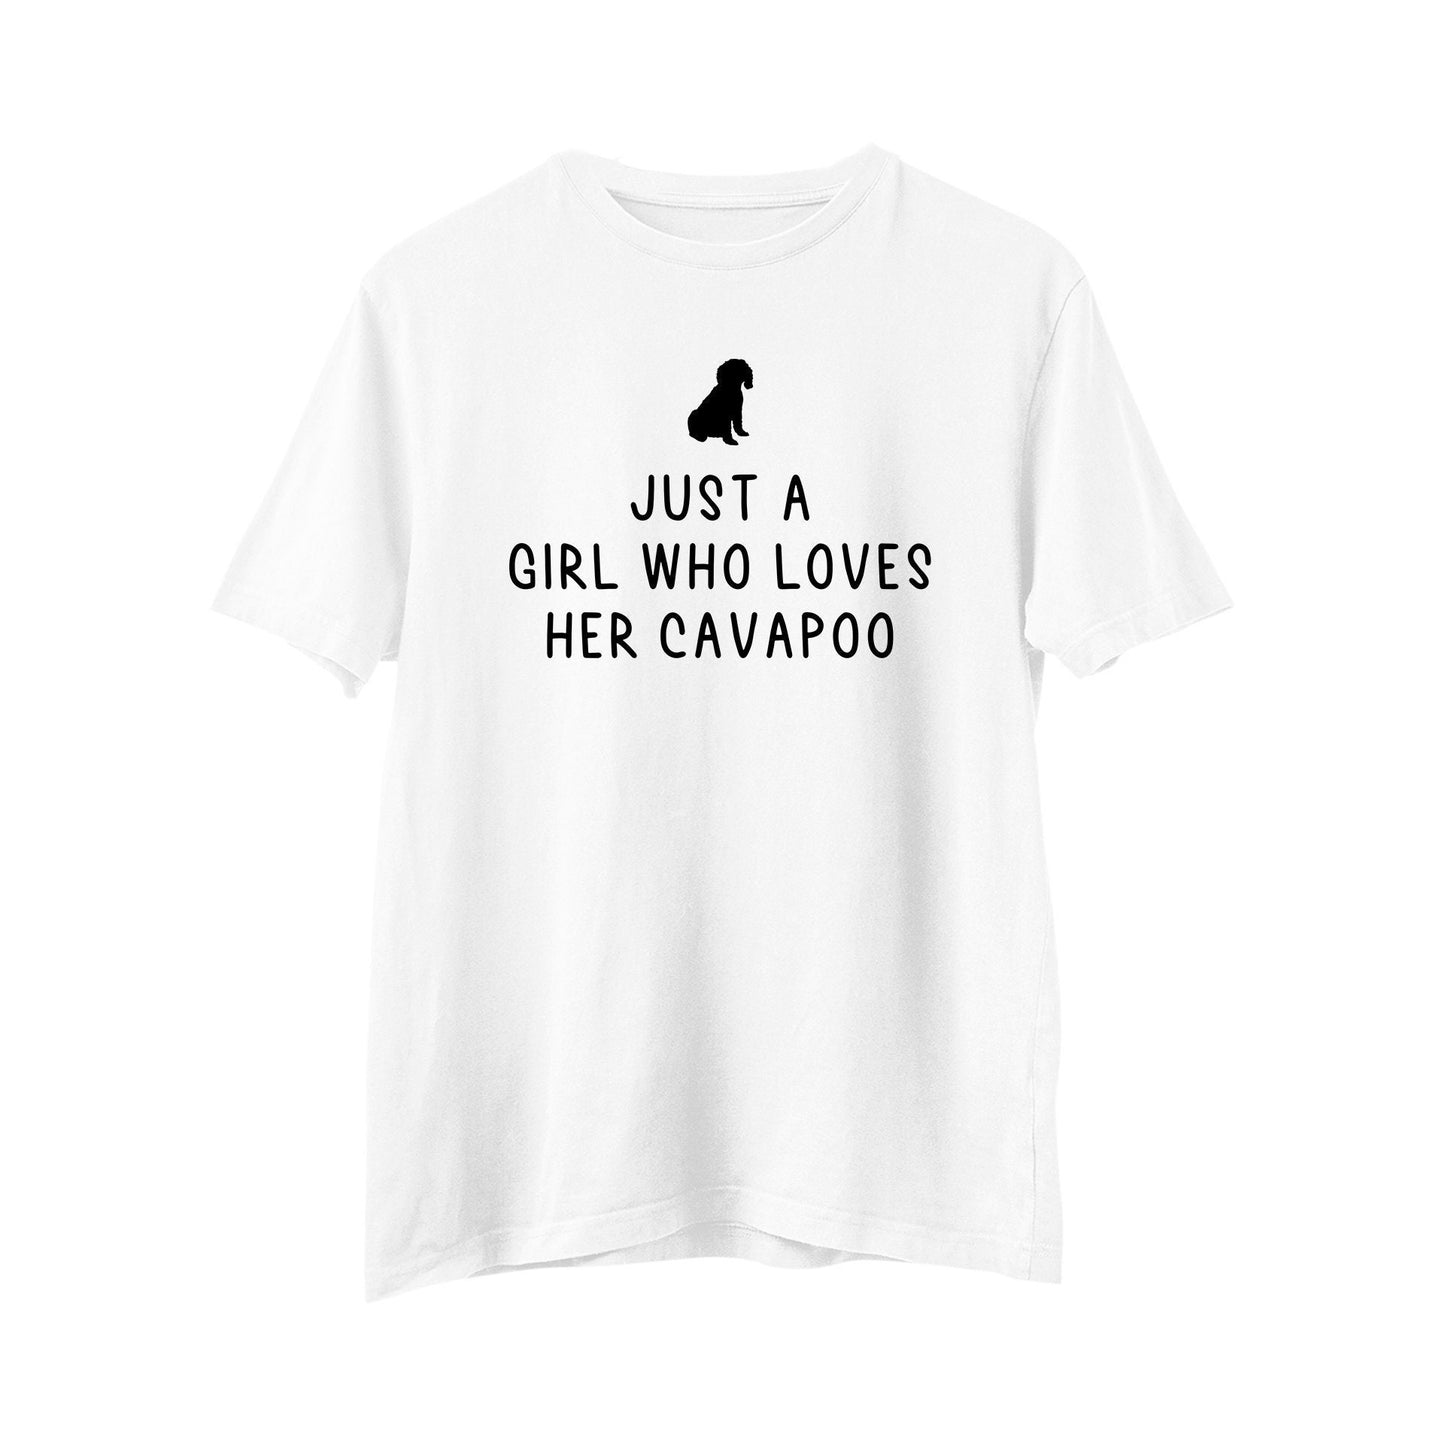 Just a Girl Who Loves Her Cavapoo Shirt, Cavapoo Mom, Cavoodle Gift, Cavoodle Lover Gift, Dog Mom Shirt, Dog Lover Shirt, Funny Dog shirt